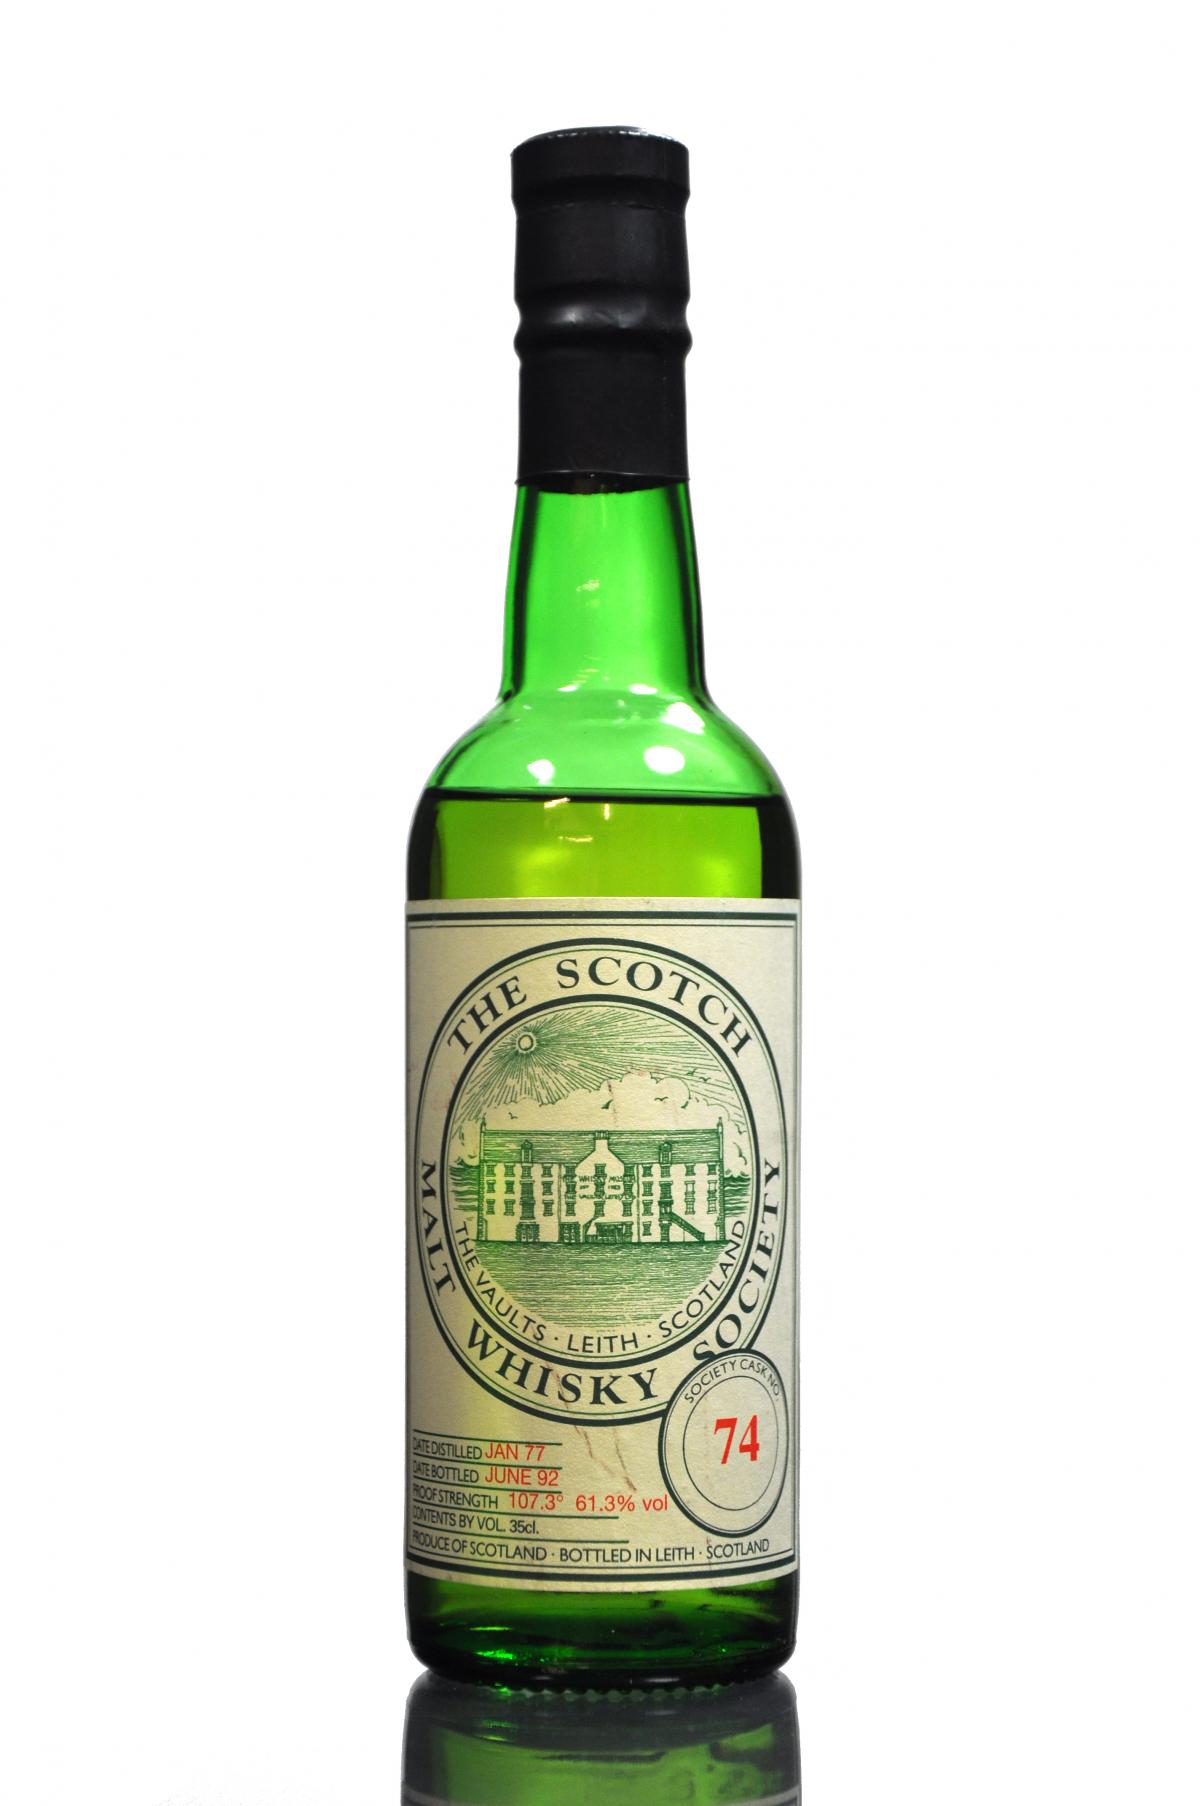 North Port 1977-1992 - SMWS 74 - 35cl